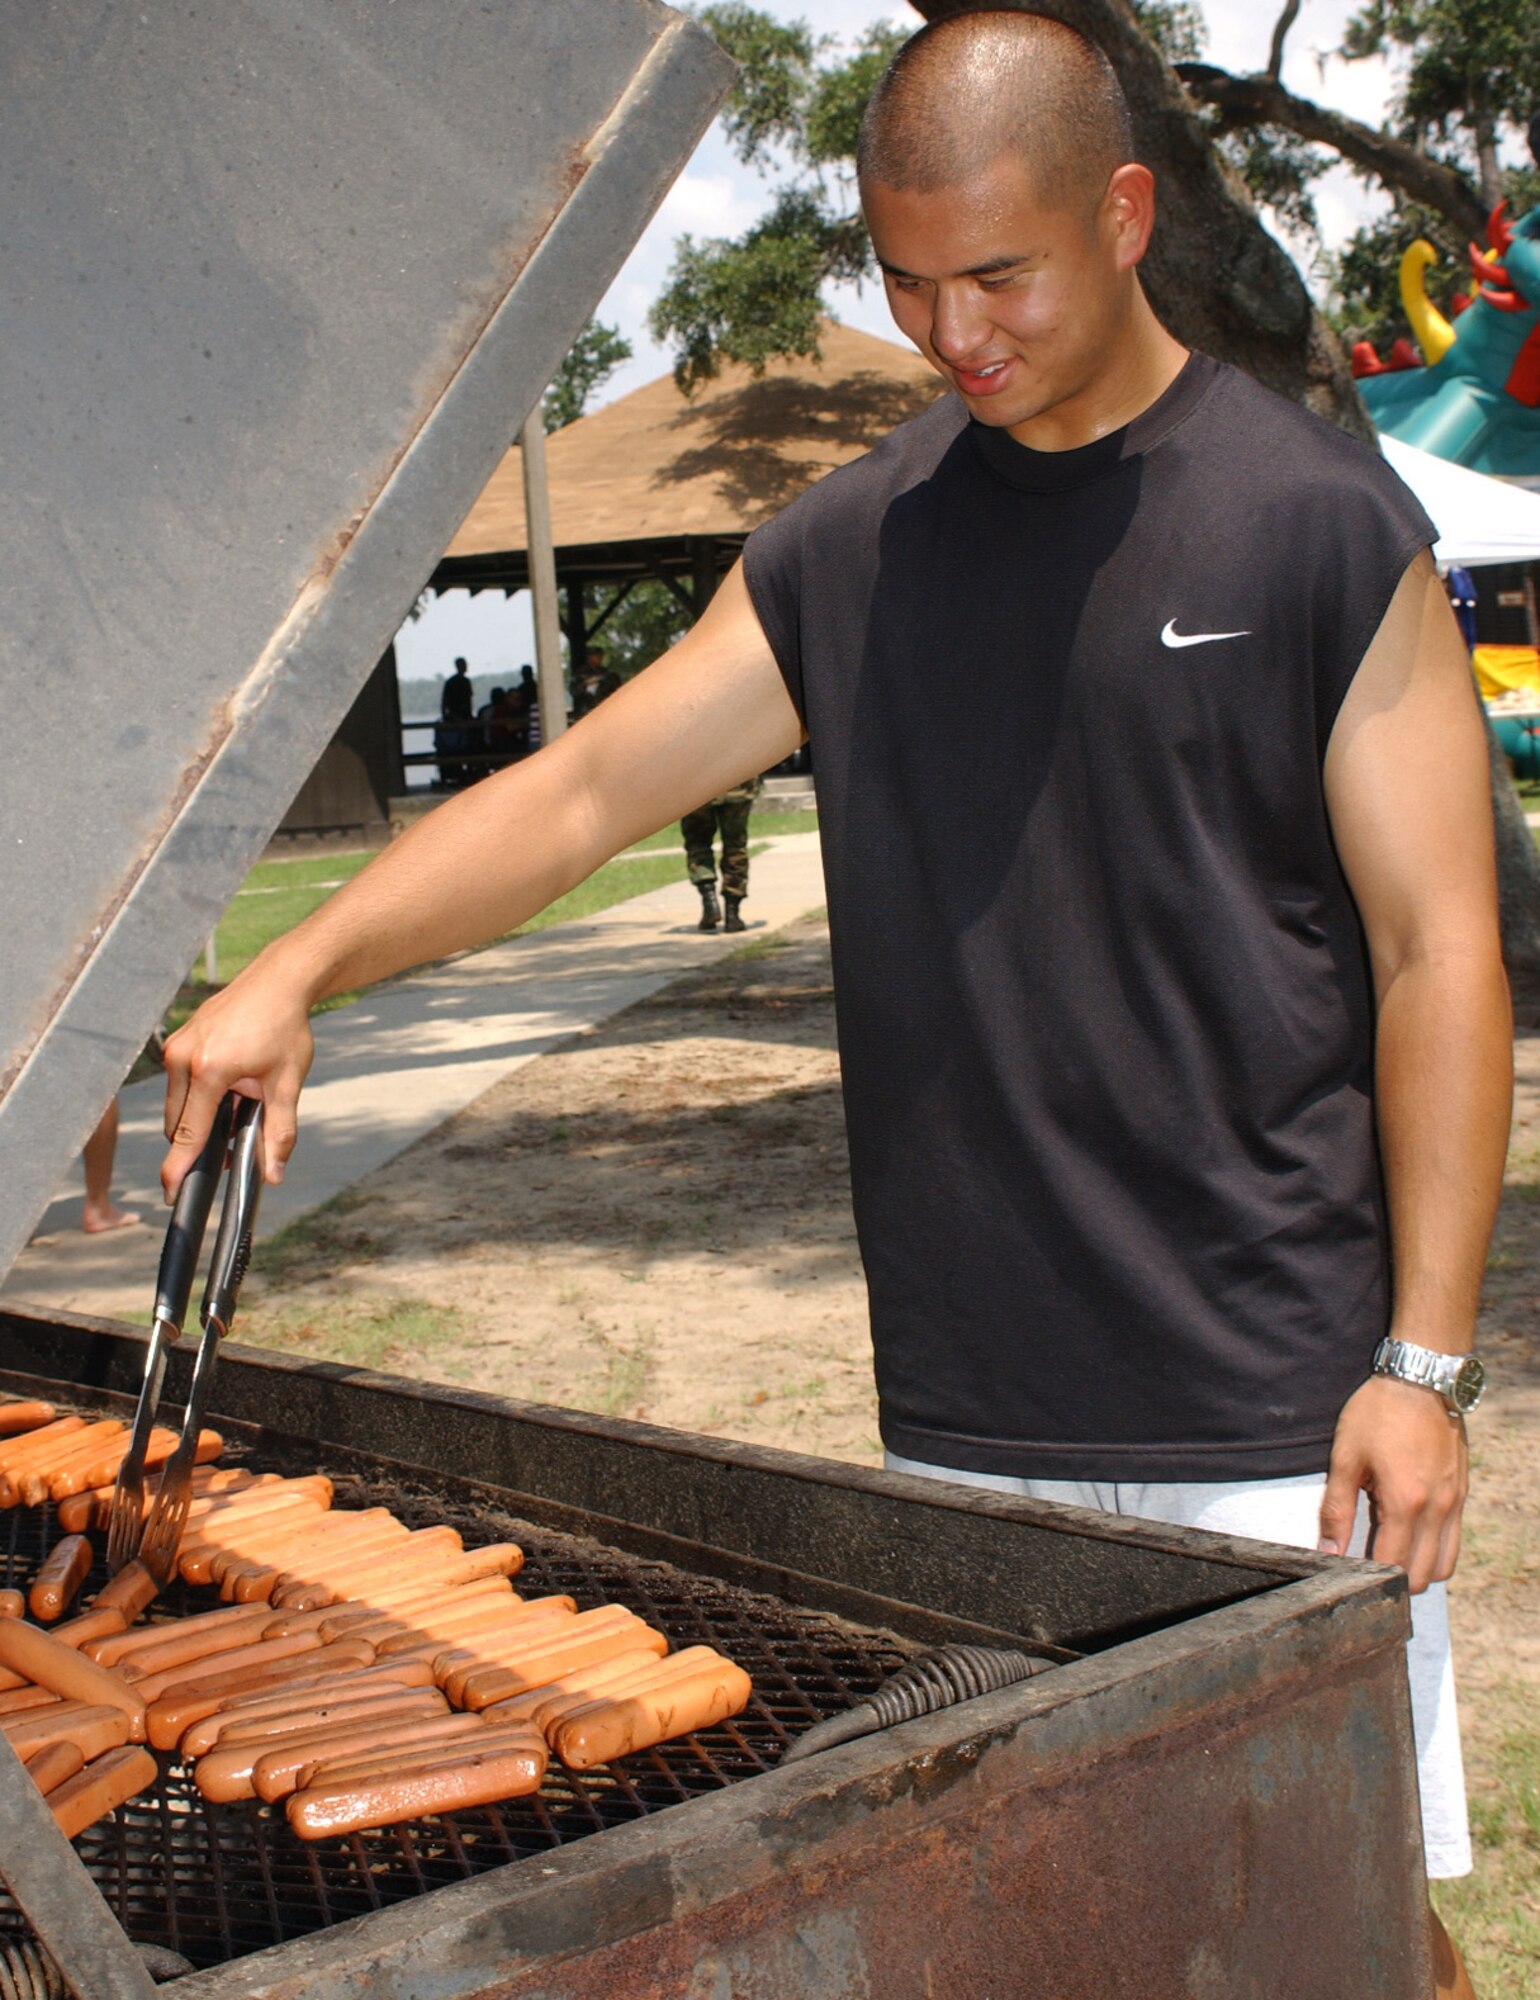 Airman Wei Lin, 81st Aerospace Medicine Squadron, mans the grill.  (U. S. Air Force photo by Kemberly Groue)